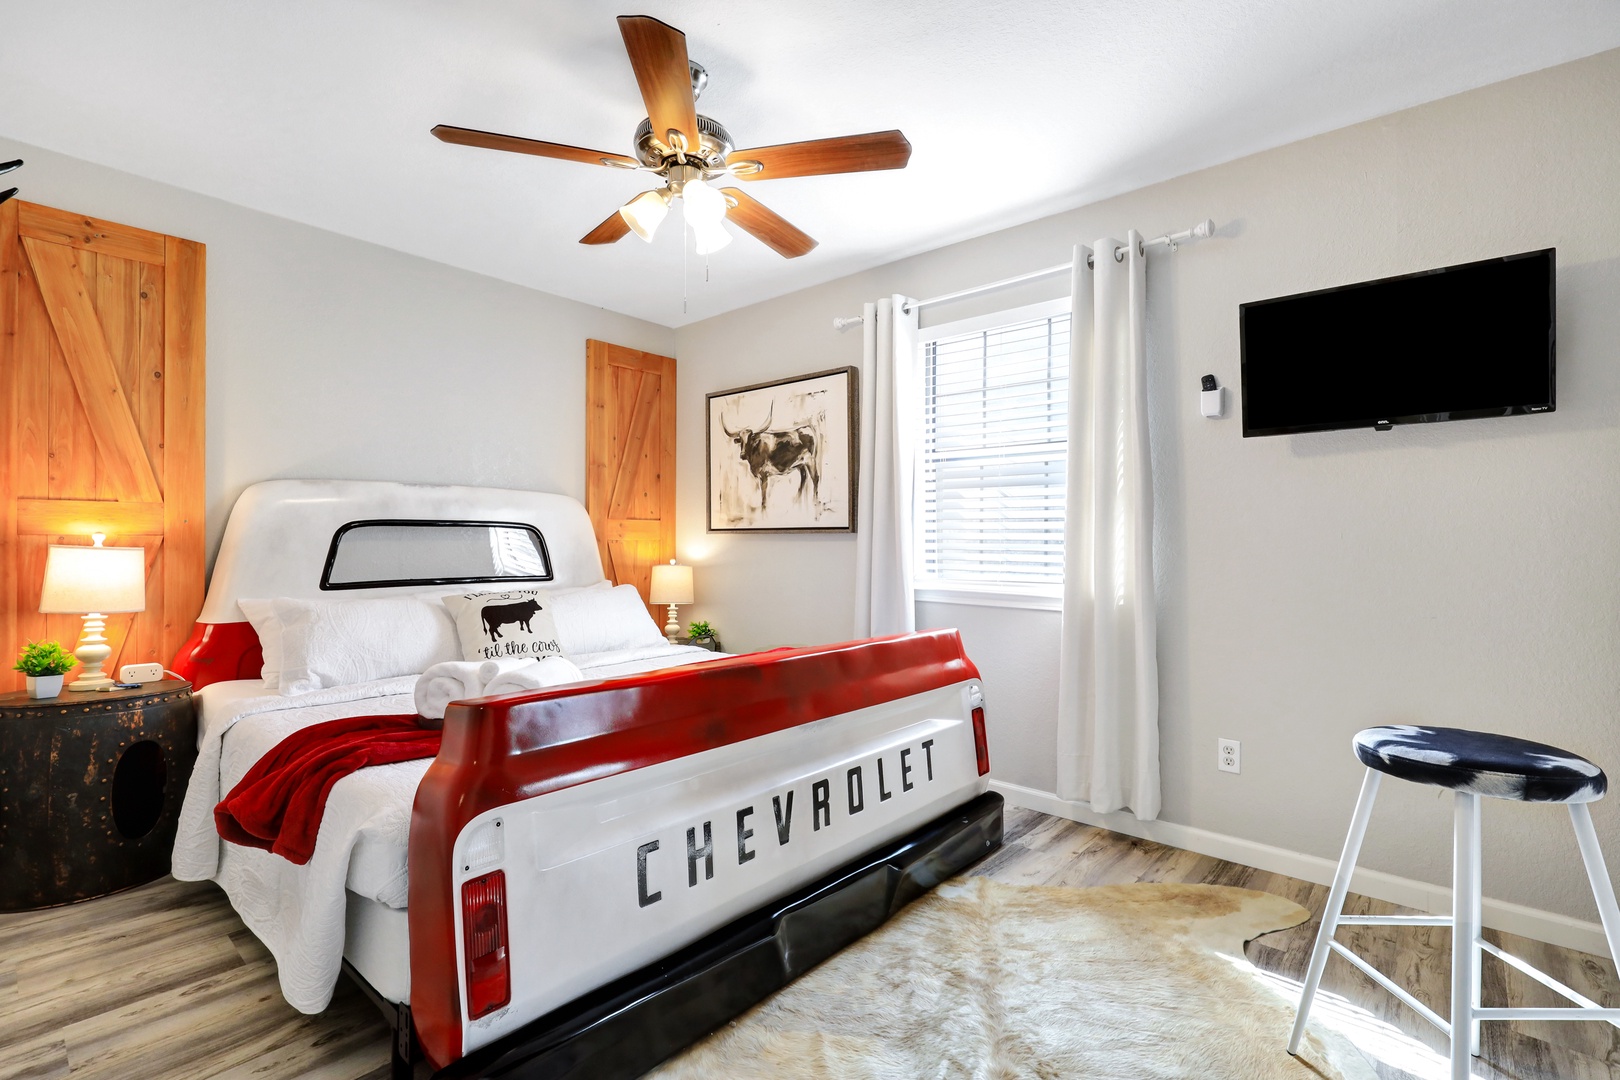 This 1st floor bedroom retreat showcases a plush king bed & Smart TV